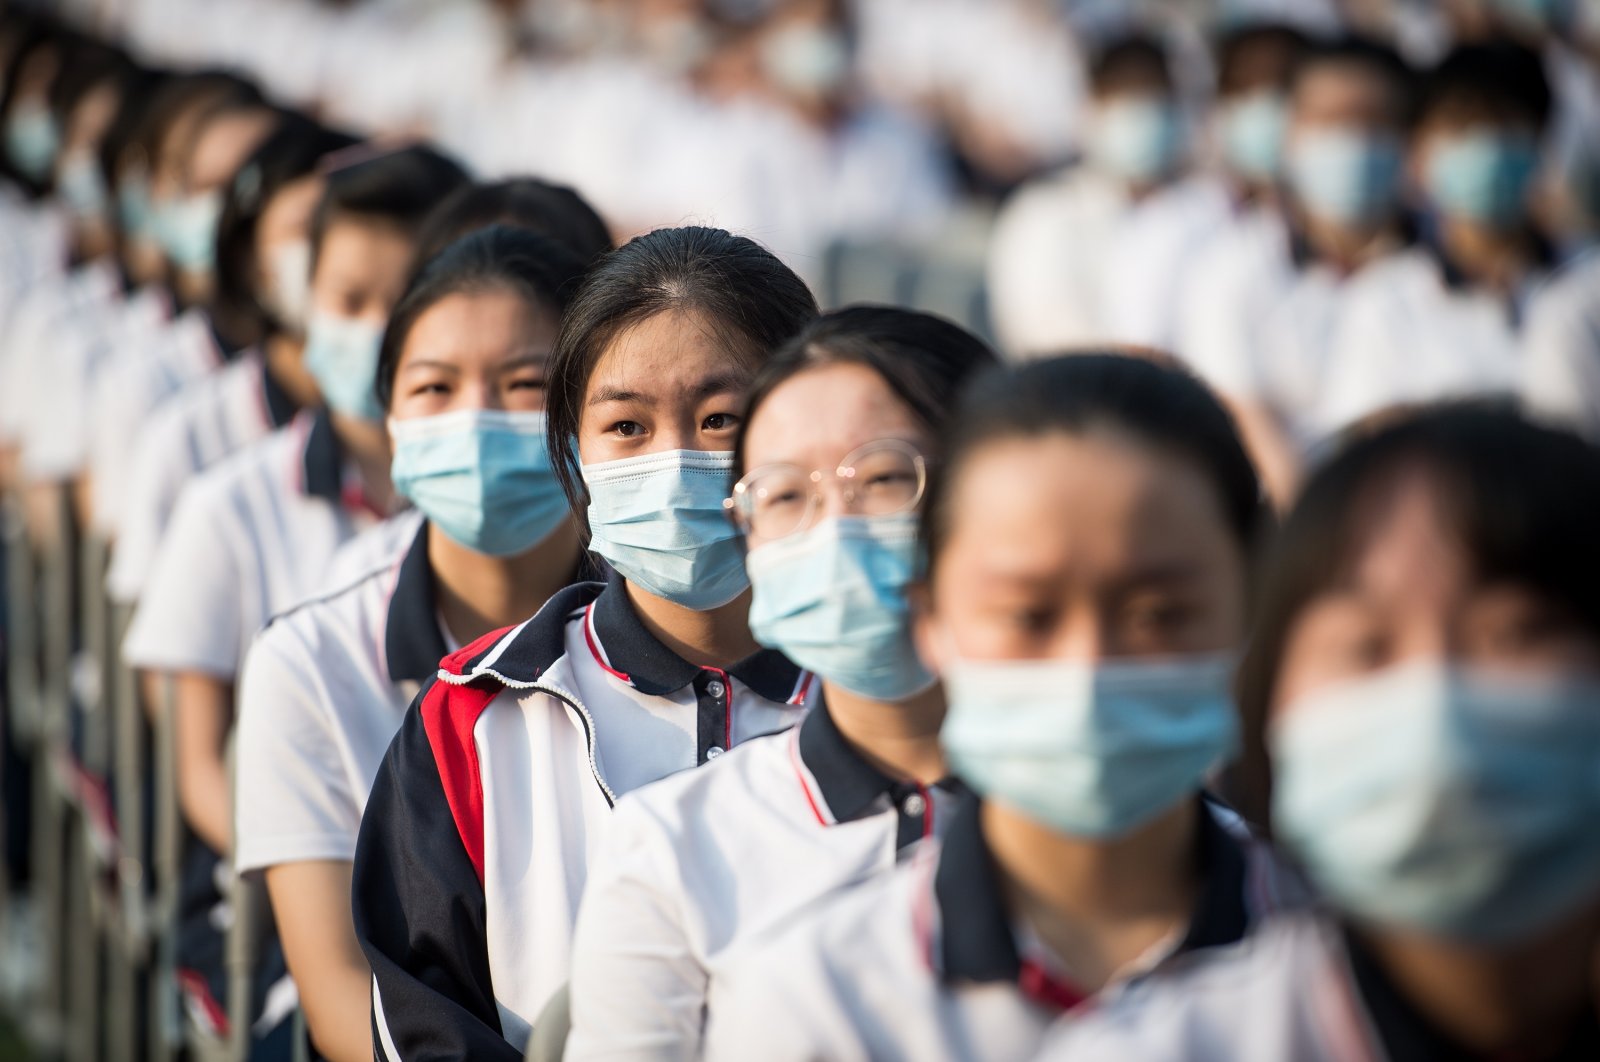 Students of Wuhan High School wearing protective face masks sit as they attend the ceremony for the new fall semester in Wuhan, Hubei Province, China, Sep. 1, 2020. (EPA Photo)